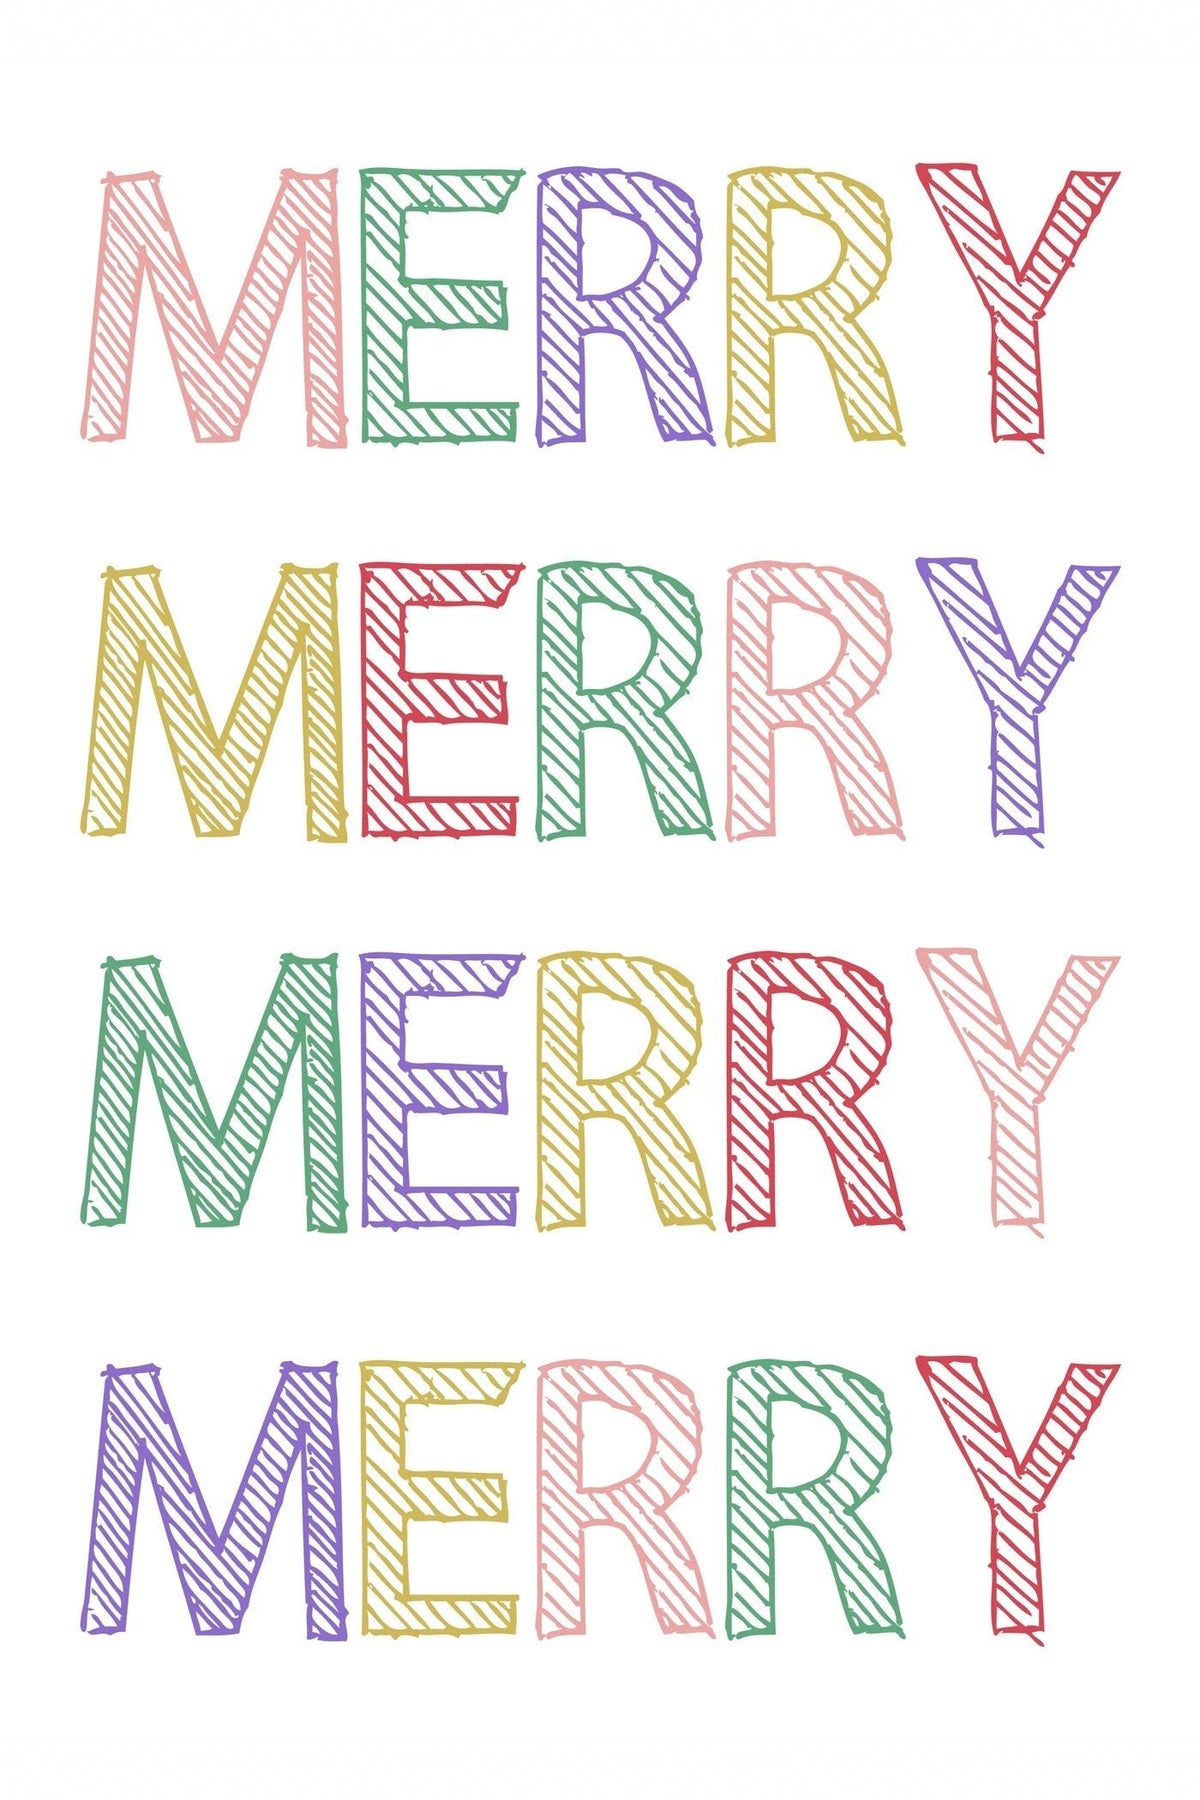 FREEBIE - Holiday Graphics - Holiday Cards - Merry Merry Merry